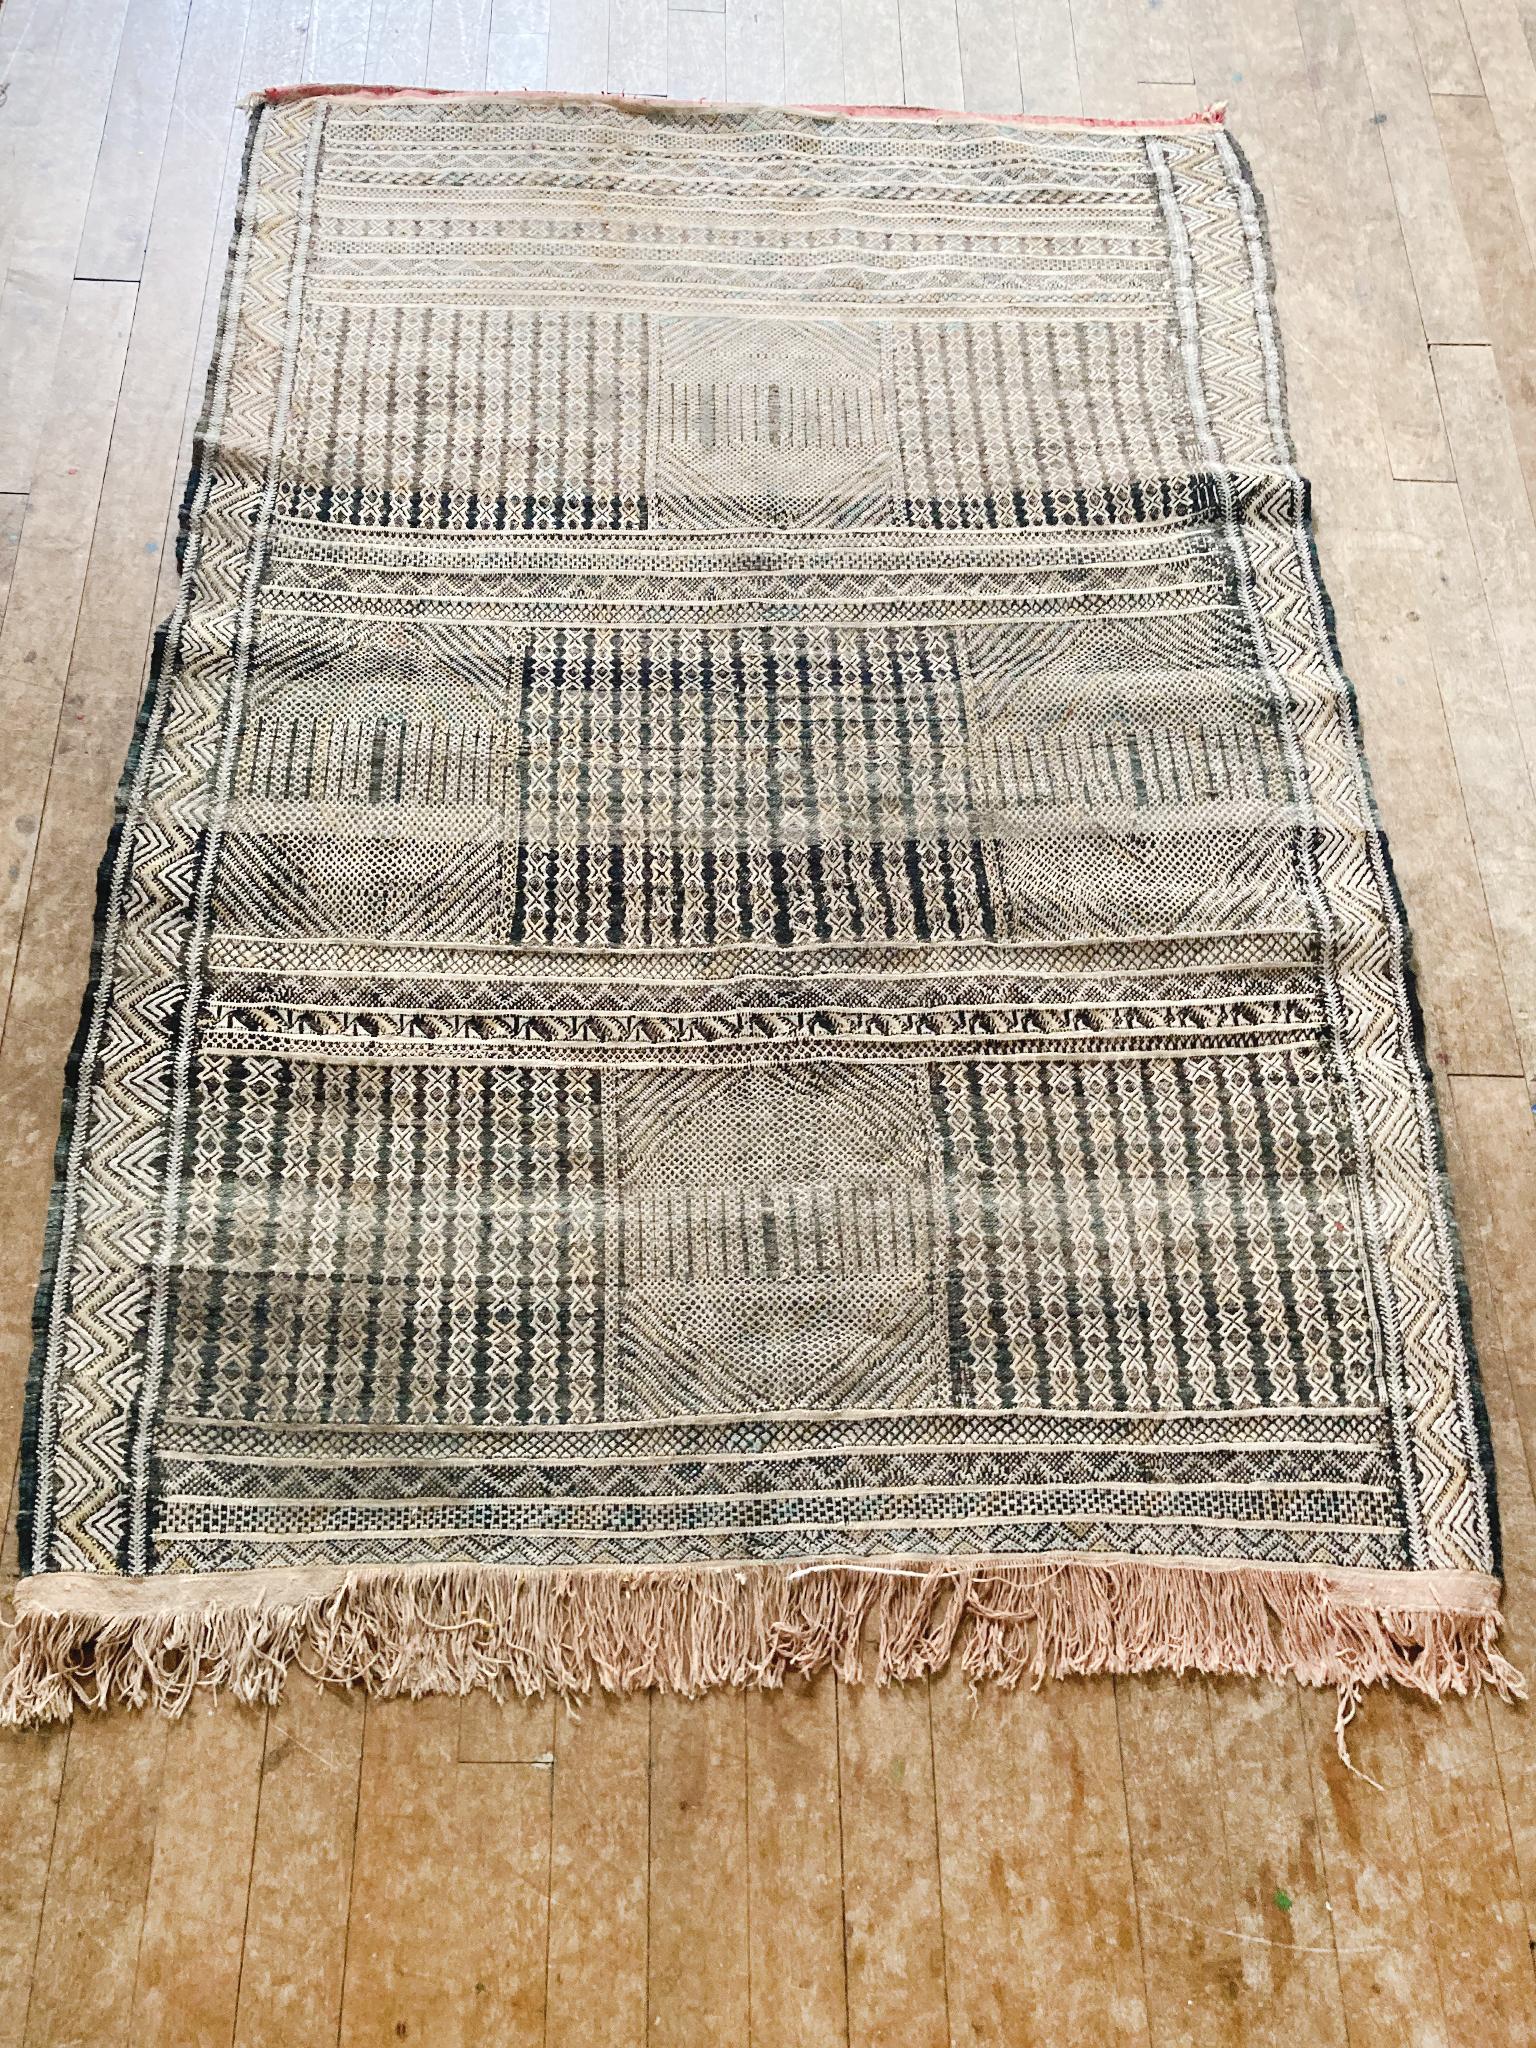 Richly textured Moroccan area rug with a primarily black-and-white palette punctuated with hints of red, yellow, and blue. Geometric patterns make up the bold design. The rug is beautifully aged.

Dimensions:
6' 10